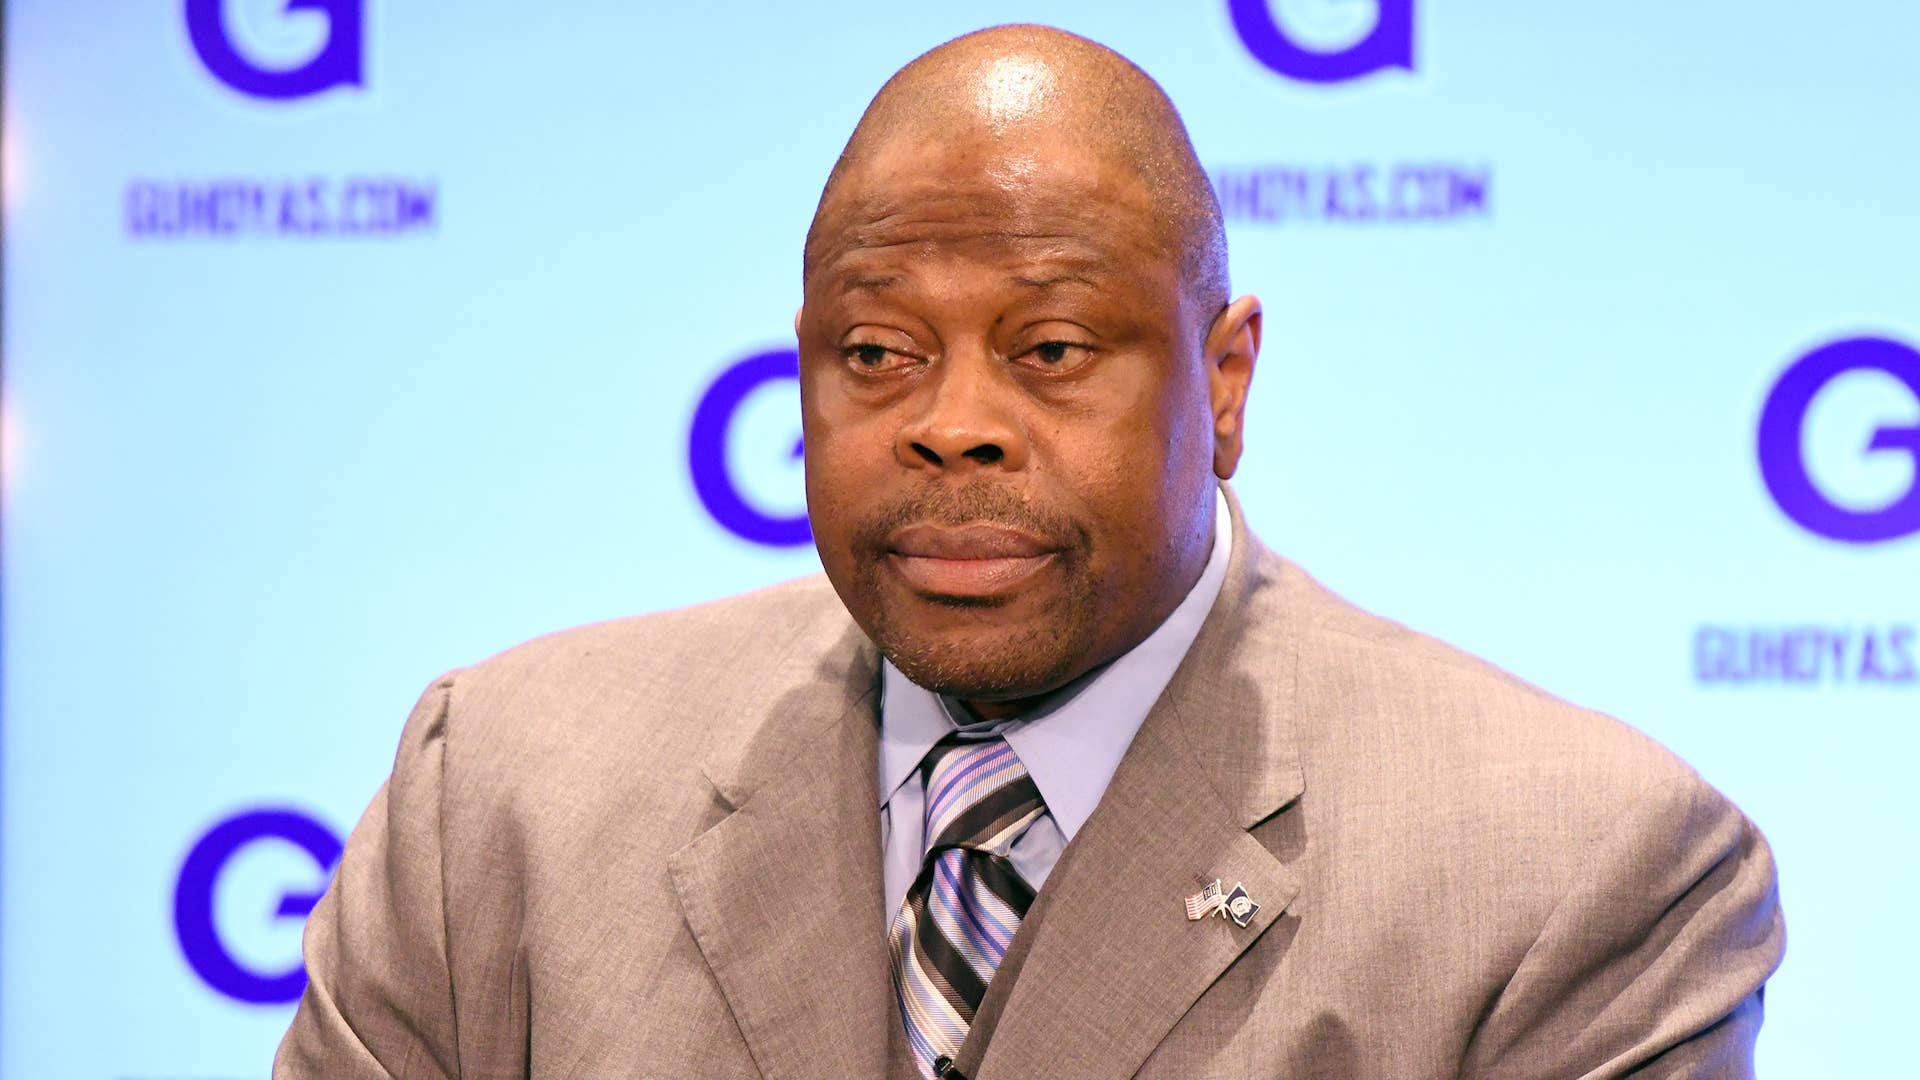 NBA Hall of Famer and former Georgetown Hoyas player Patrick Ewing